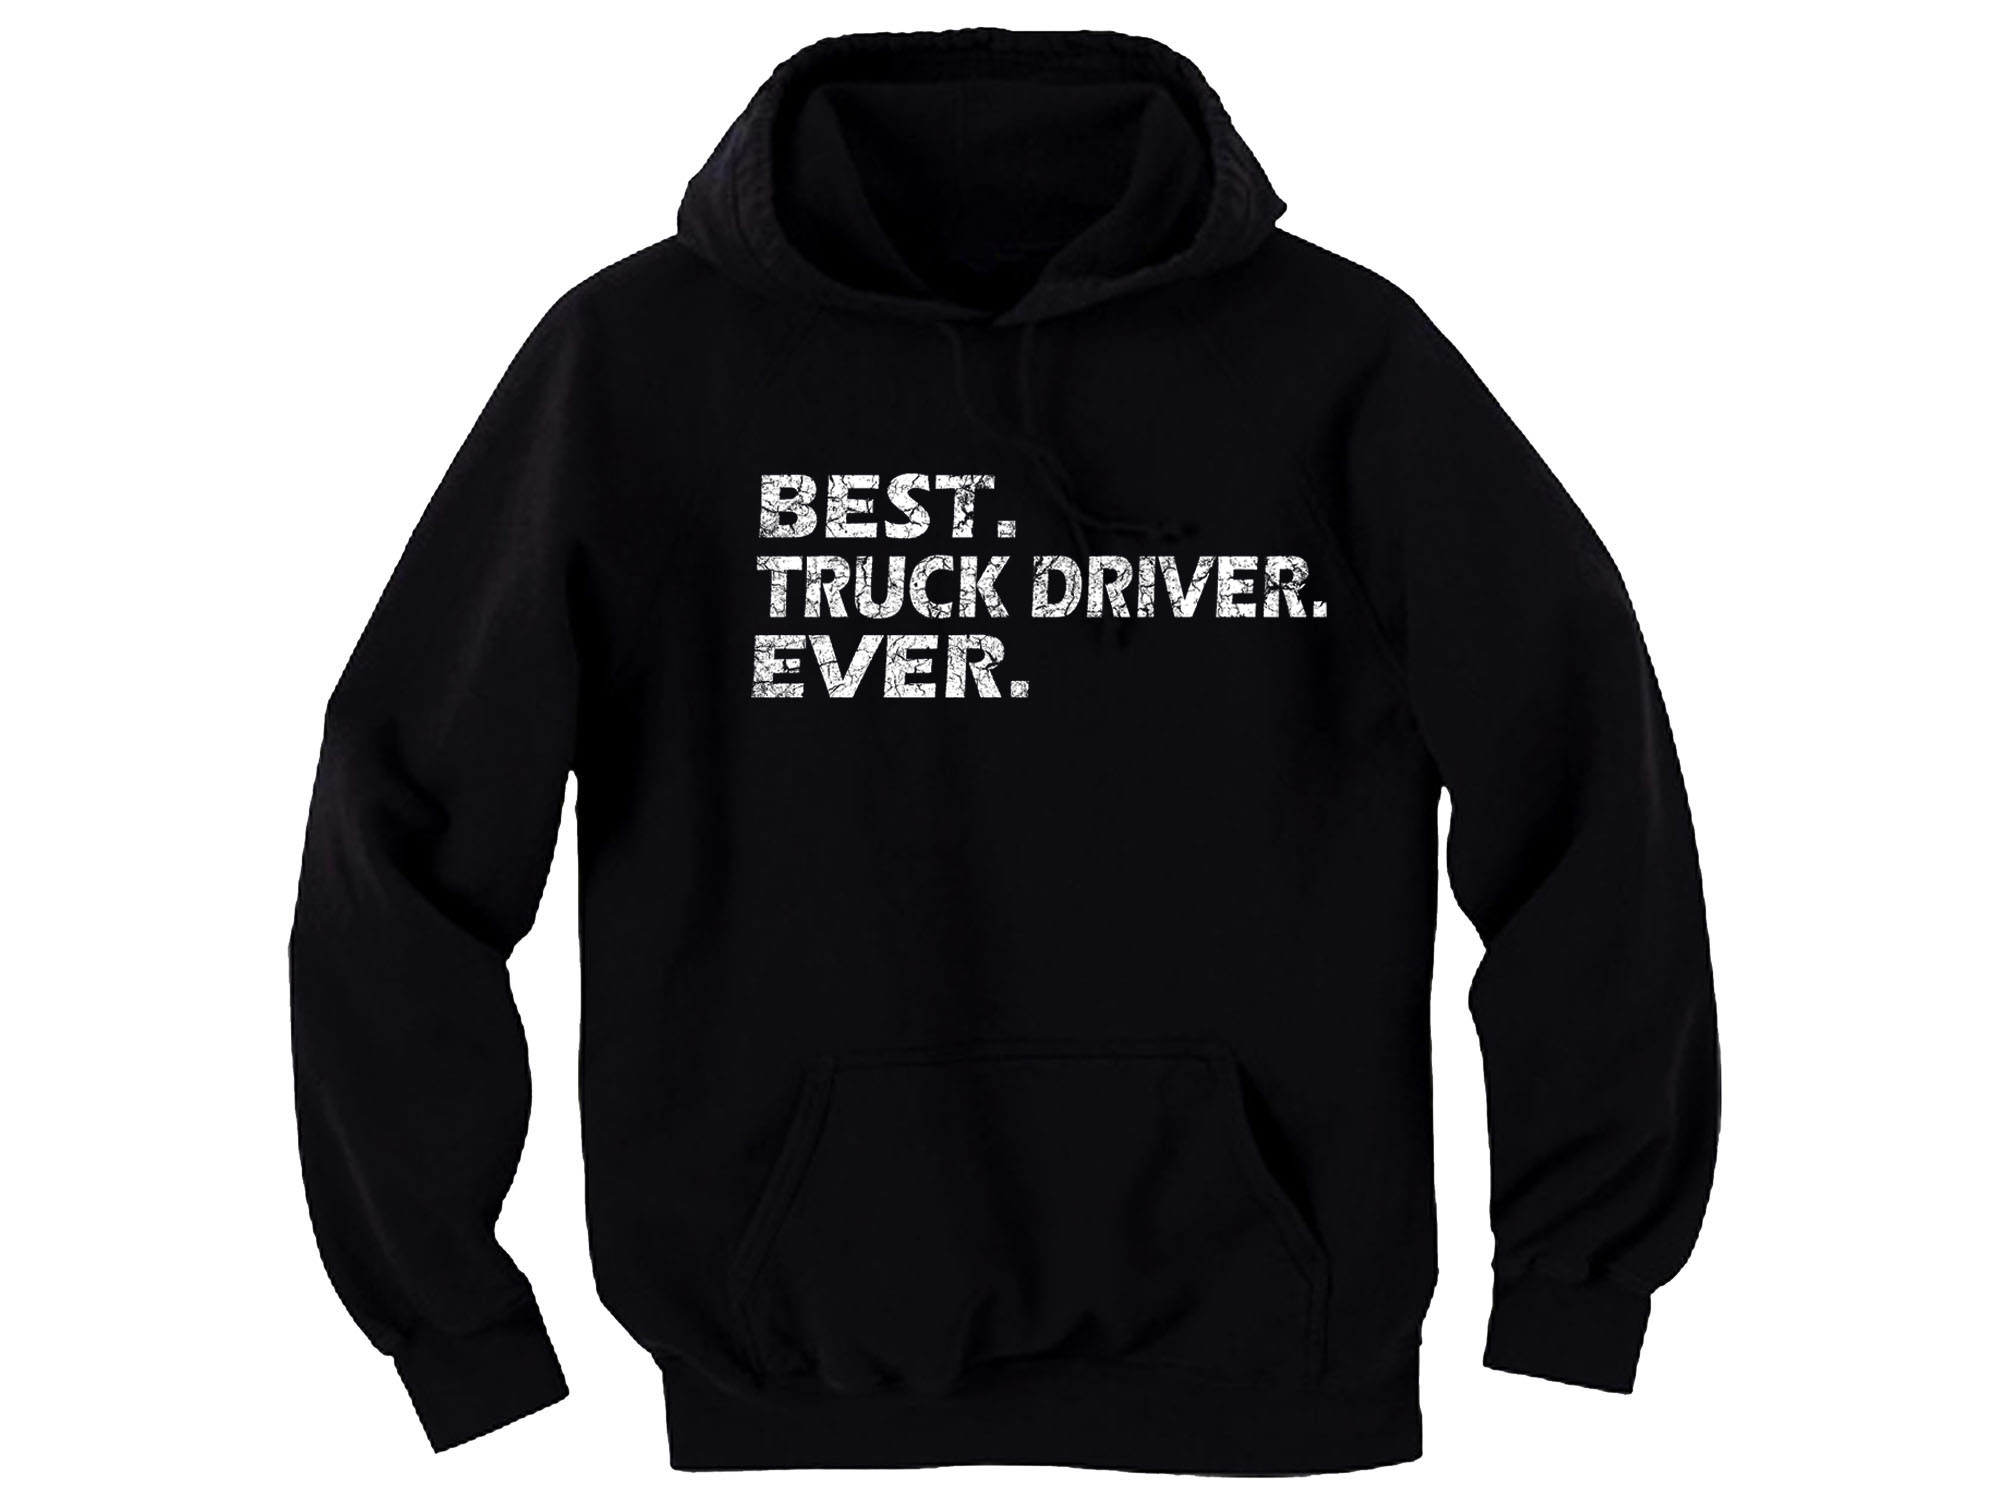 Best truck driver ever distressed print hoodie coworker,father,friend gift